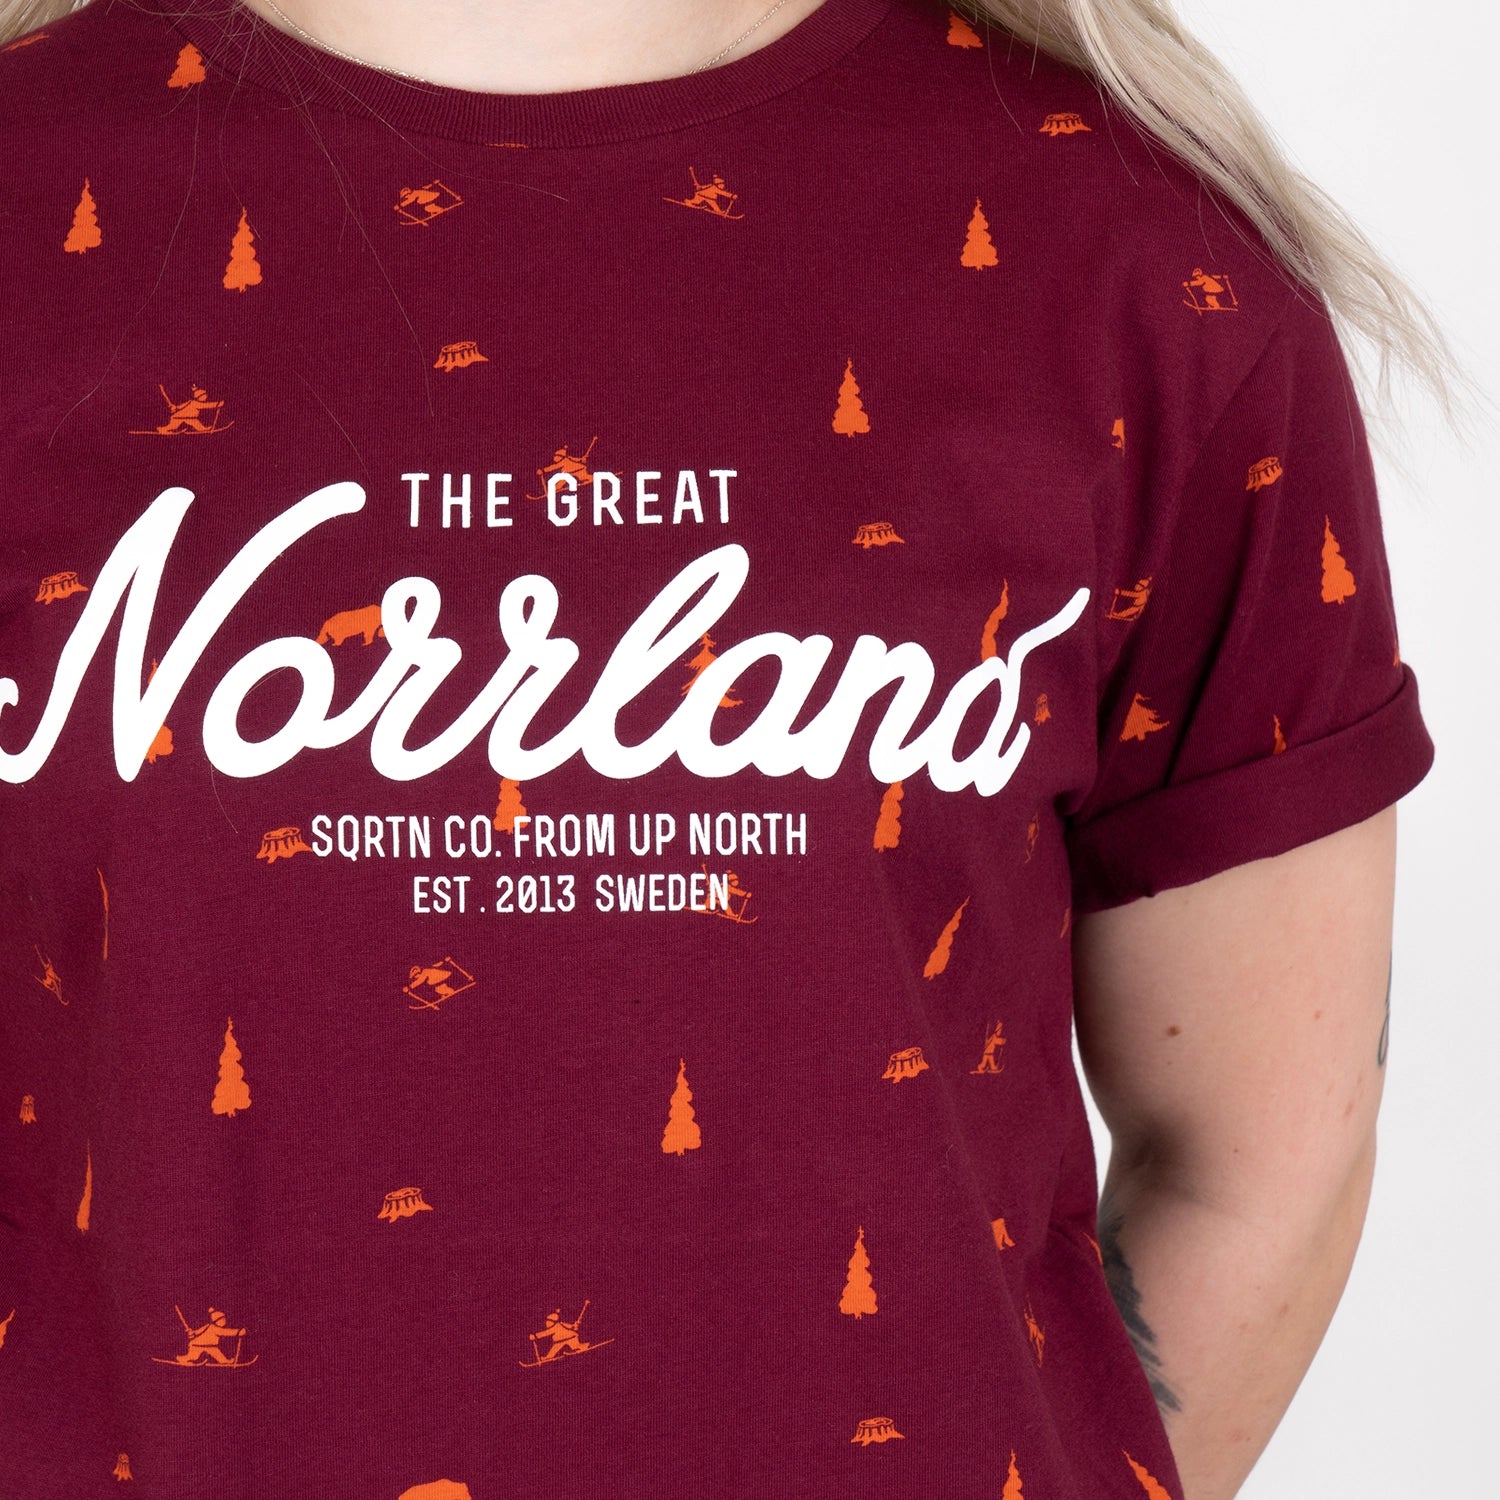 GREAT NORRLAND T-SHIRT - SKIERS BURGUNDY